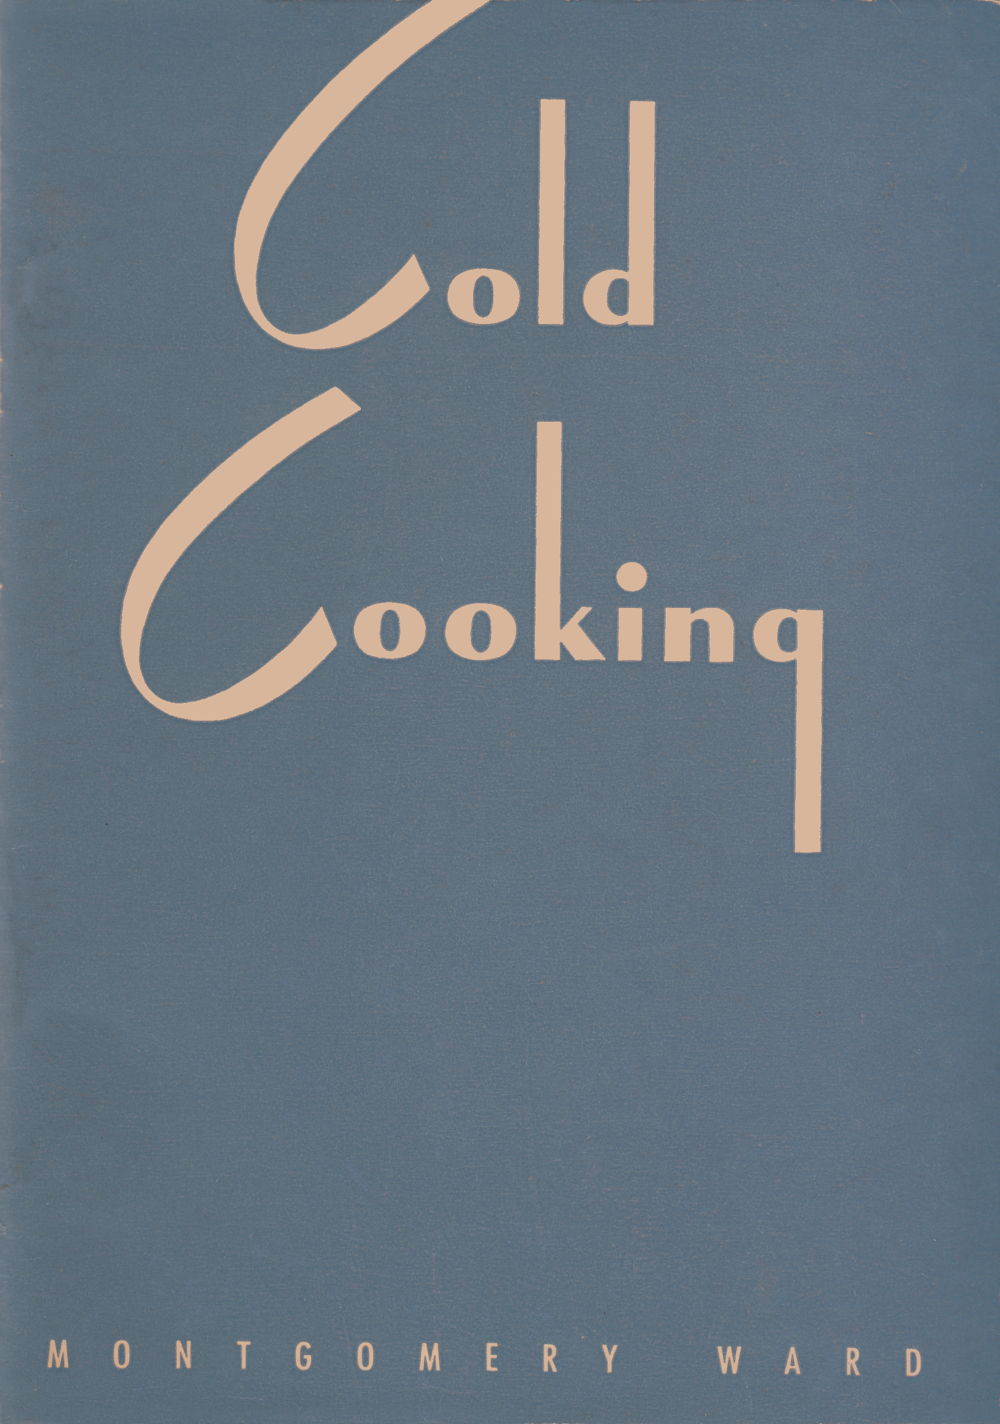 Montgomery Ward Cold Cooking: A 1942 manual and recipe book for the Montgomery Ward refrigerator.; cookbooks; refrigerators